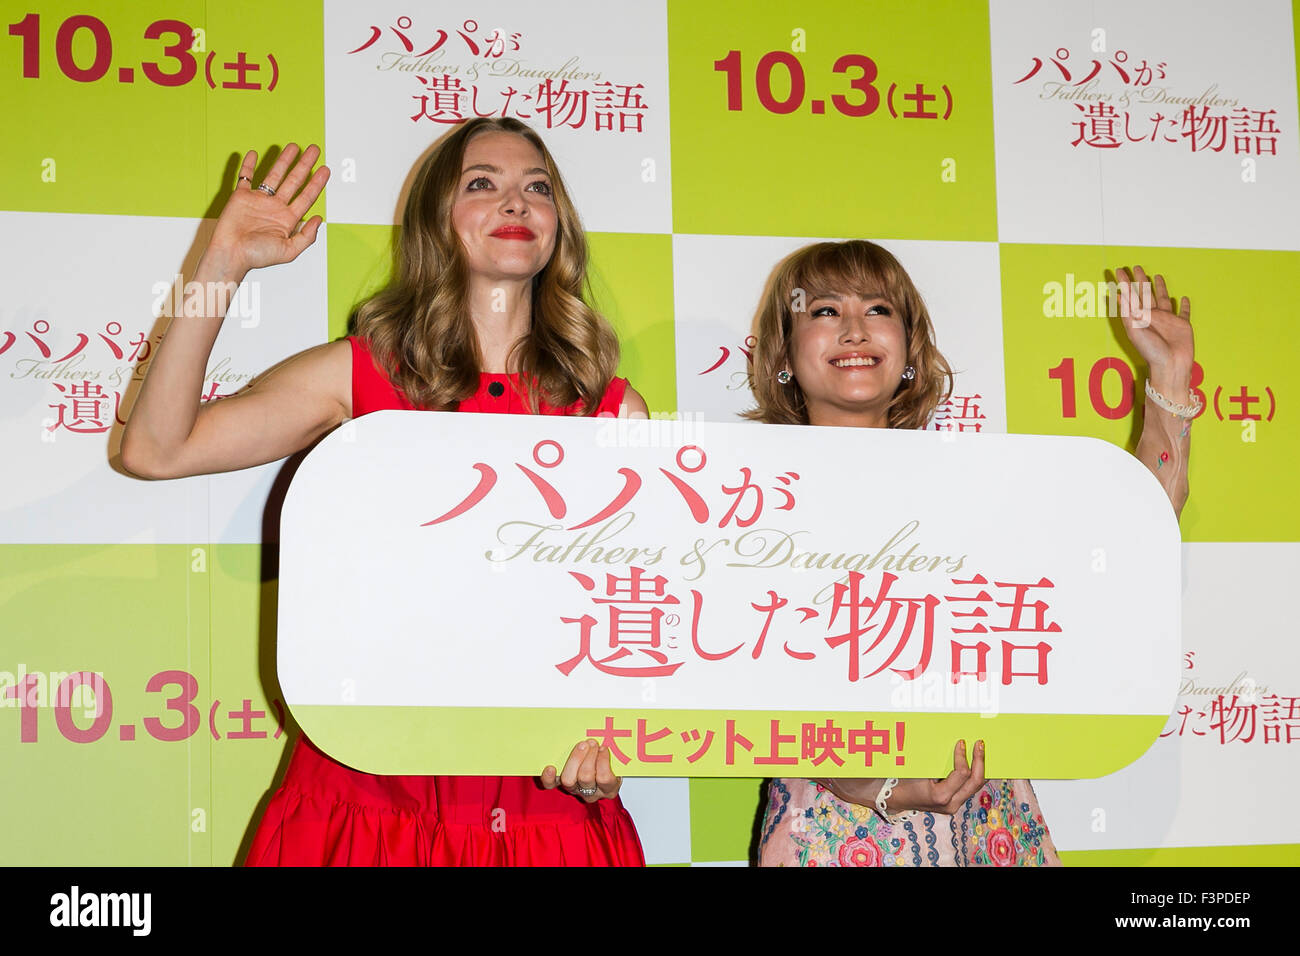 (L to R) American actress Amanda Seyfried and Japanese model, talent and singer IMALU greet to the cameras during a stage greeting for the film Fathers and Daughters on October 11, 2015, Tokyo, Japan. The movie was released in the Japanese theaters on October 3rd. © Rodrigo Reyes Marin/AFLO/Alamy Live News Stock Photo